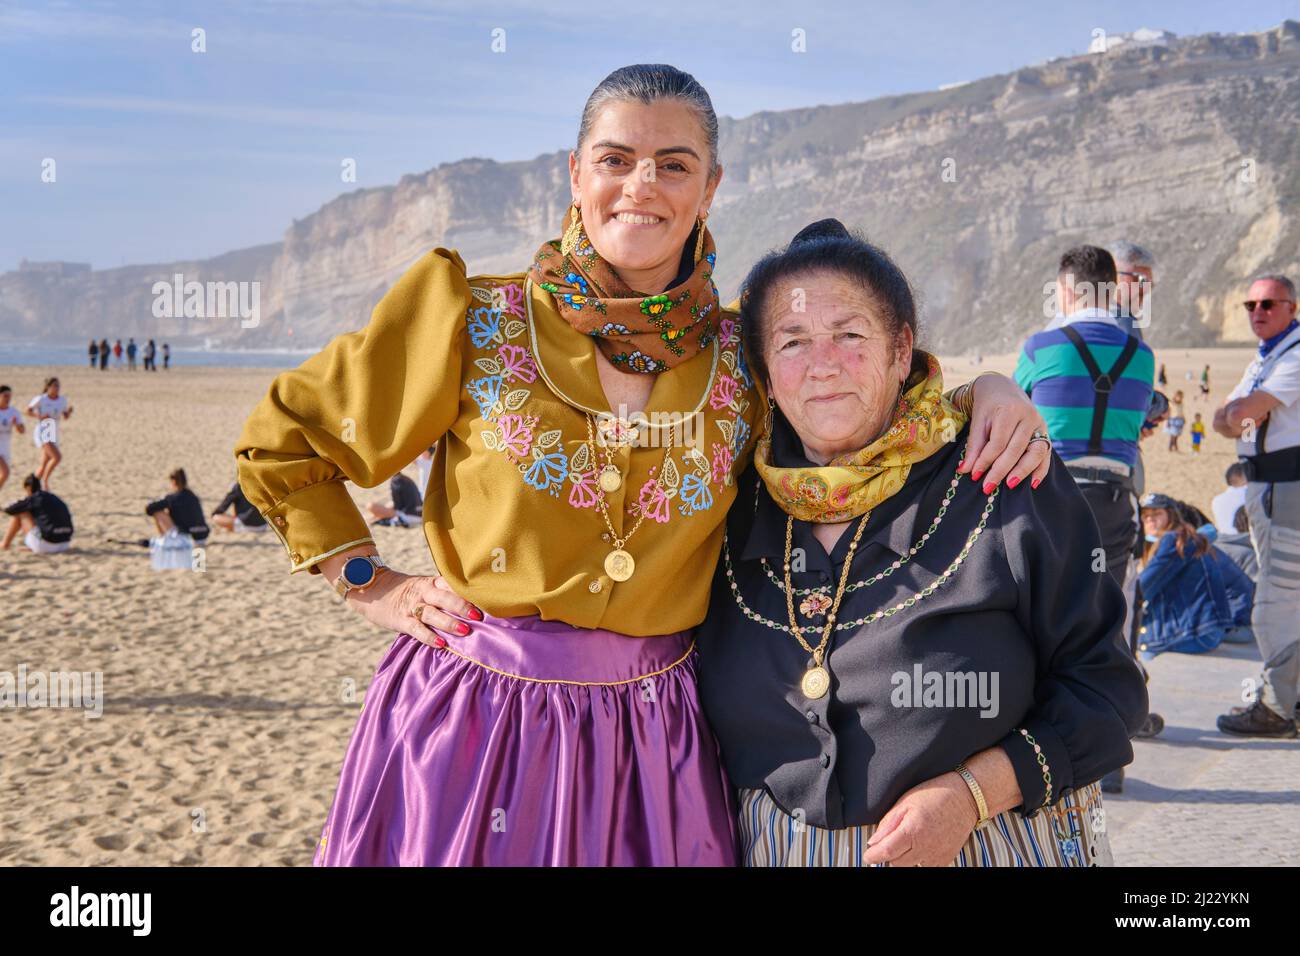 On a celebration day, women from Nazaré dress the traditional outfit. Colourful dresses with seven skirts. Nazaré, Portugal Stock Photo